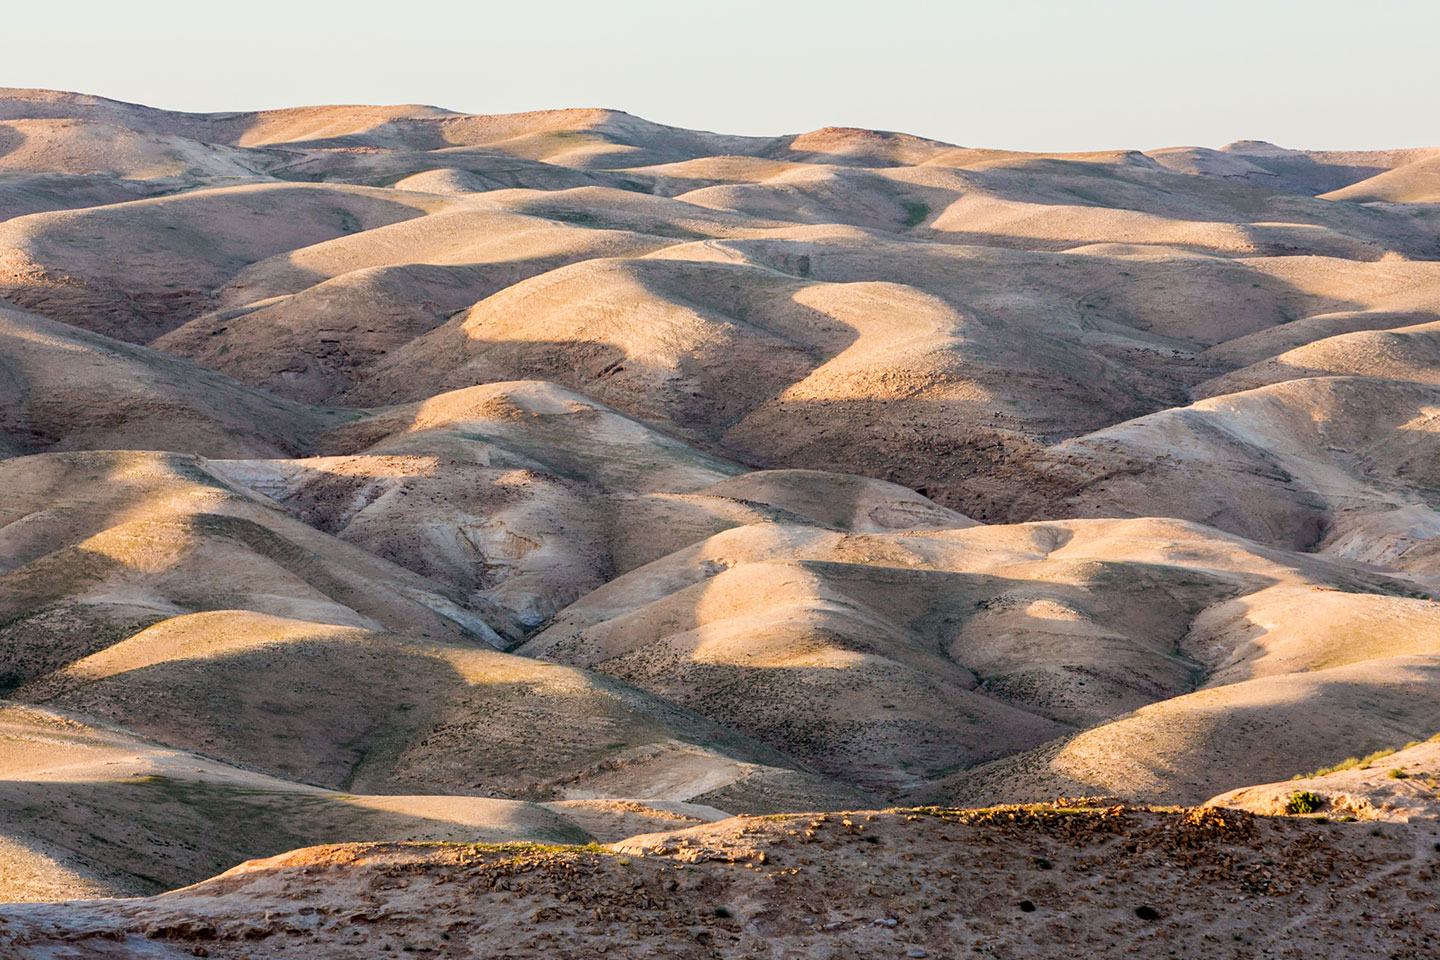 Negev desert in Israel during a travel photography trip